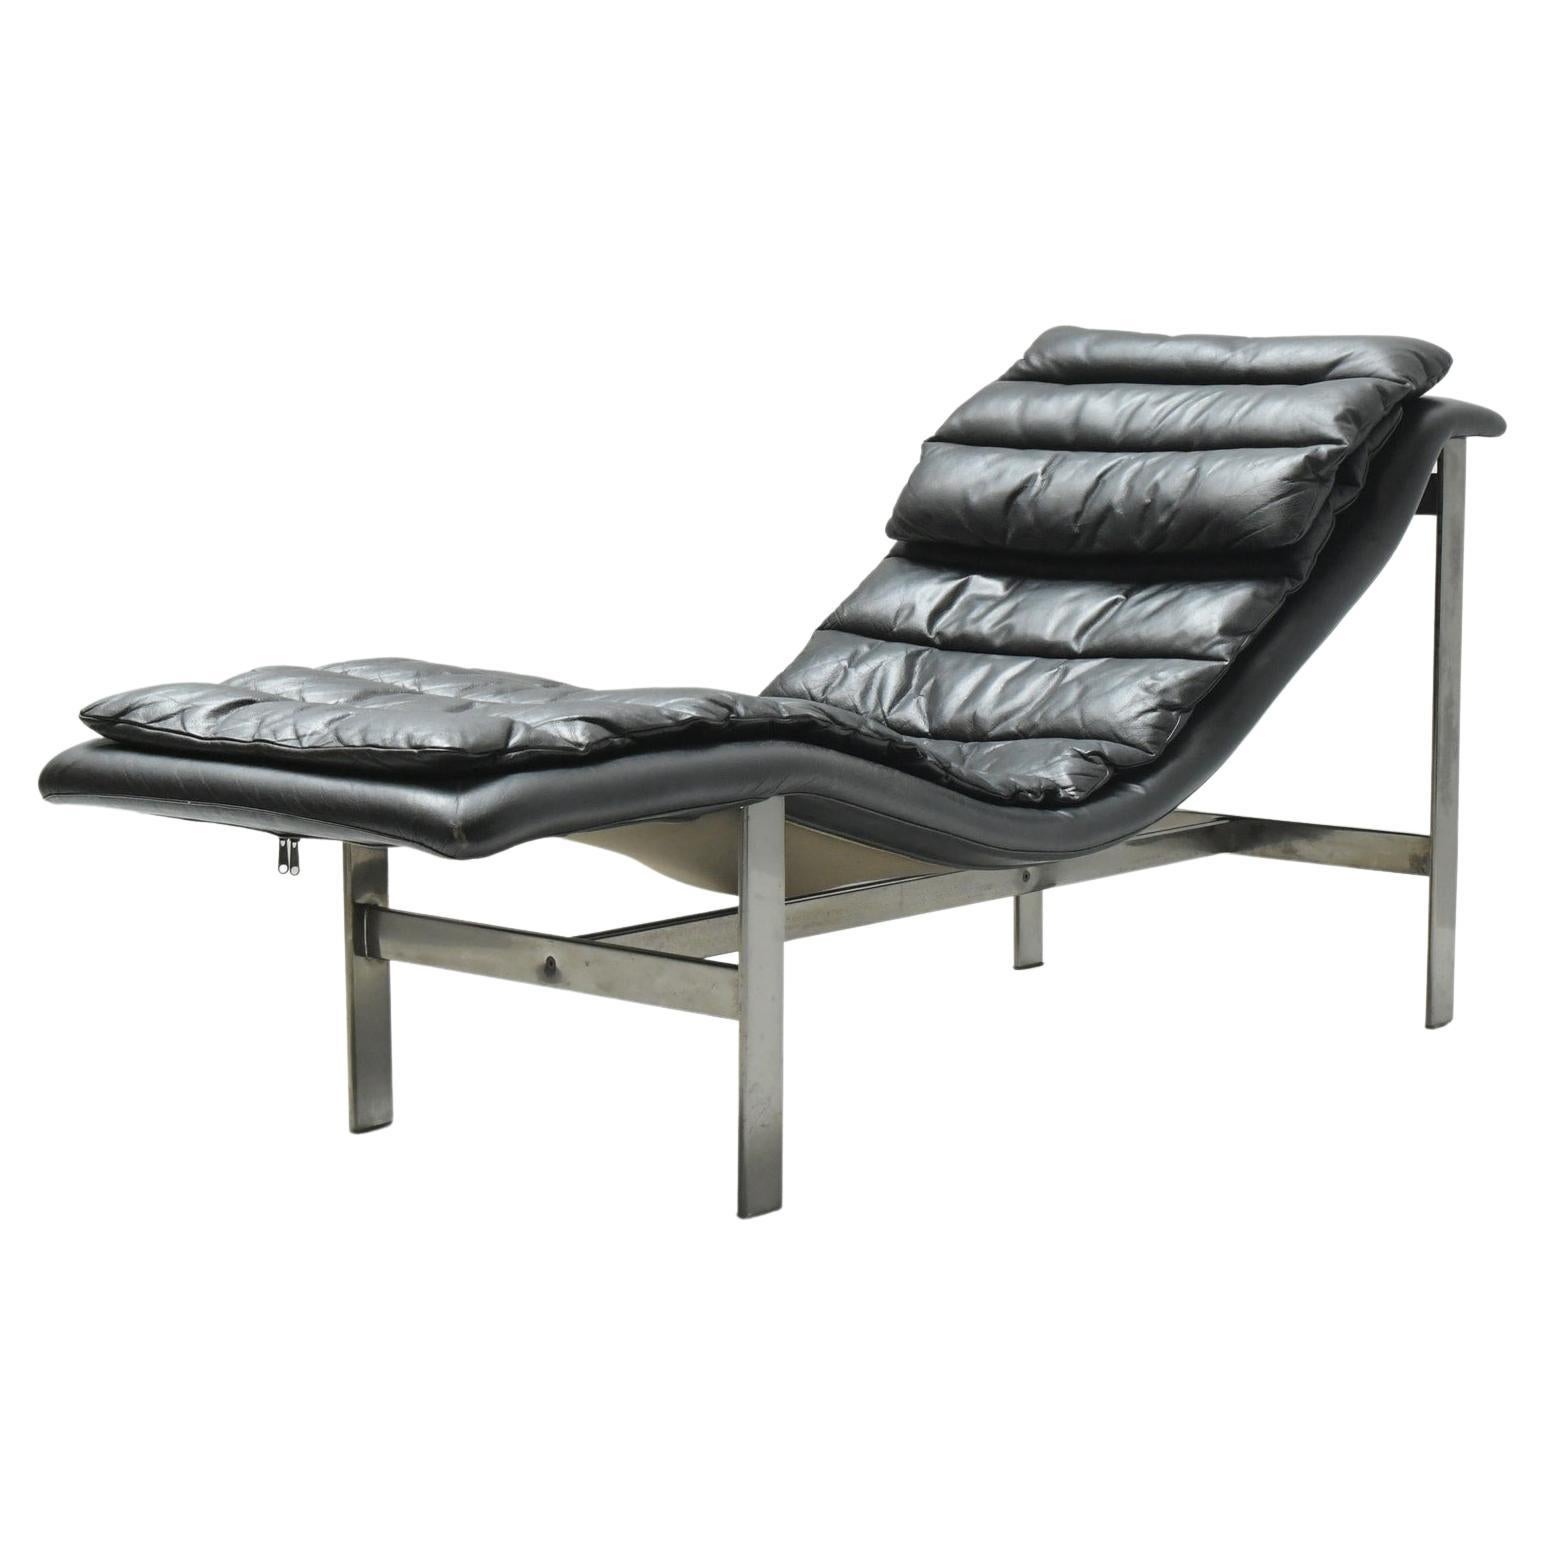 Vintage Lounge daybed in black leather by Mobel Italia - Italy For Sale